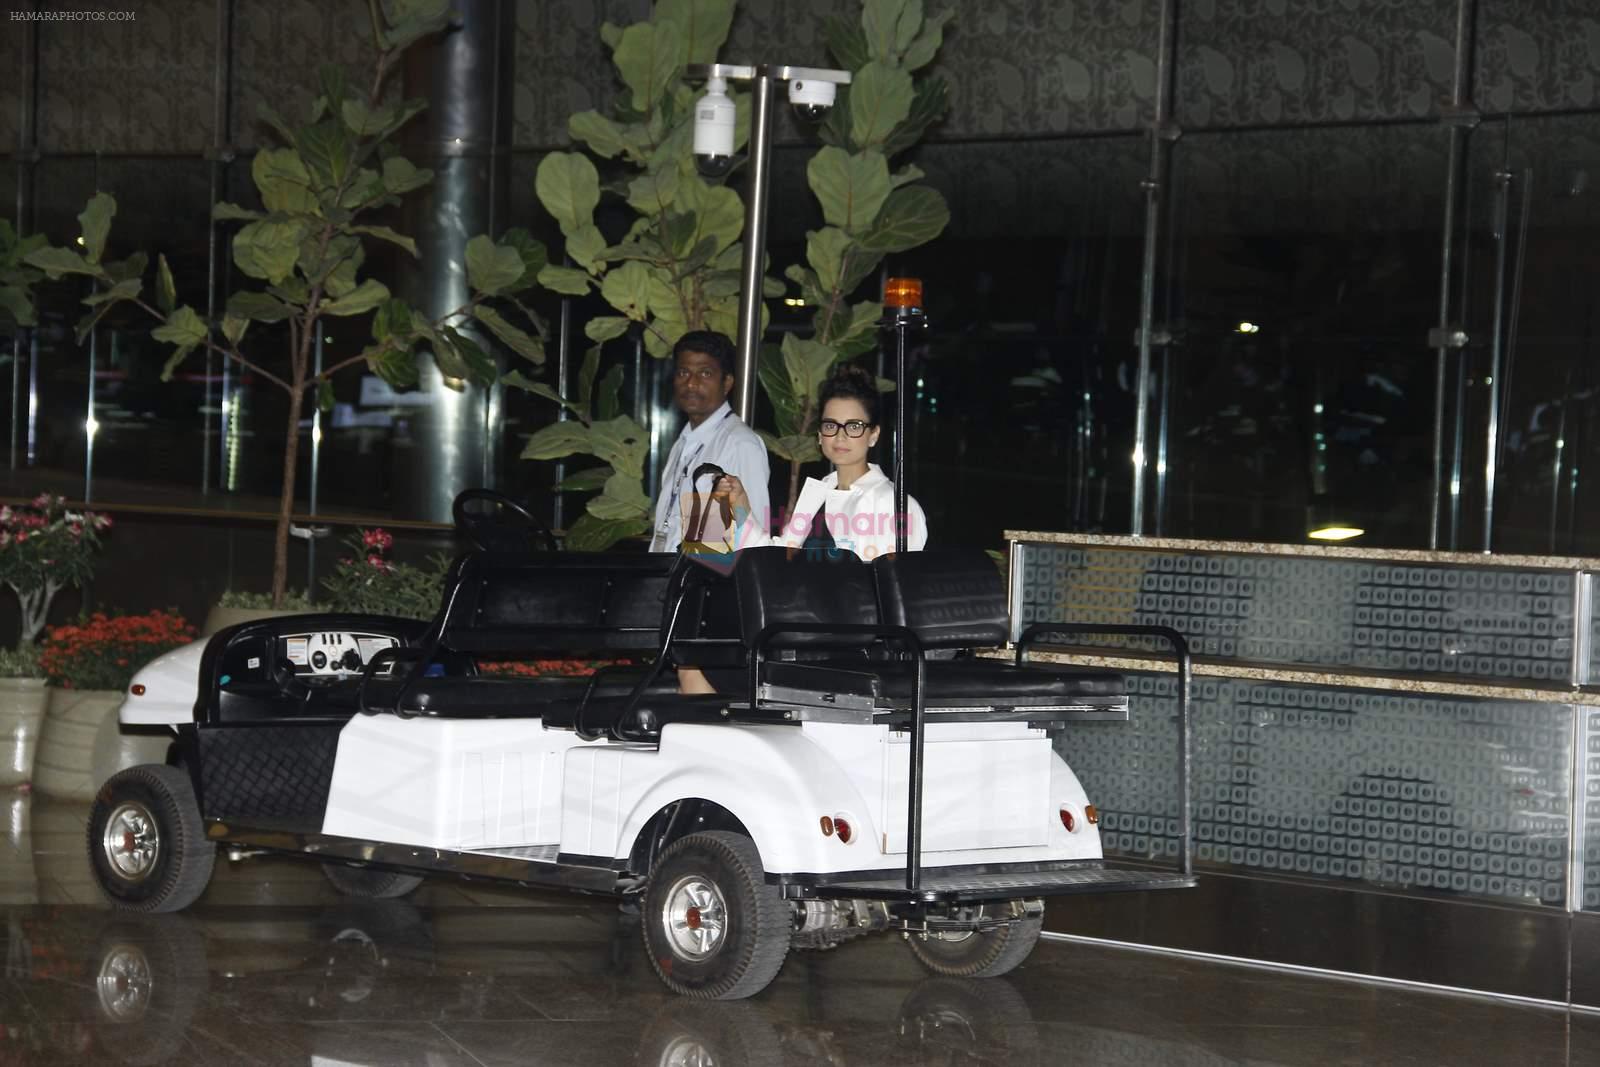 Kangana Ranaut leave sfor Queen premiere in Paris on 8th Sept 2015